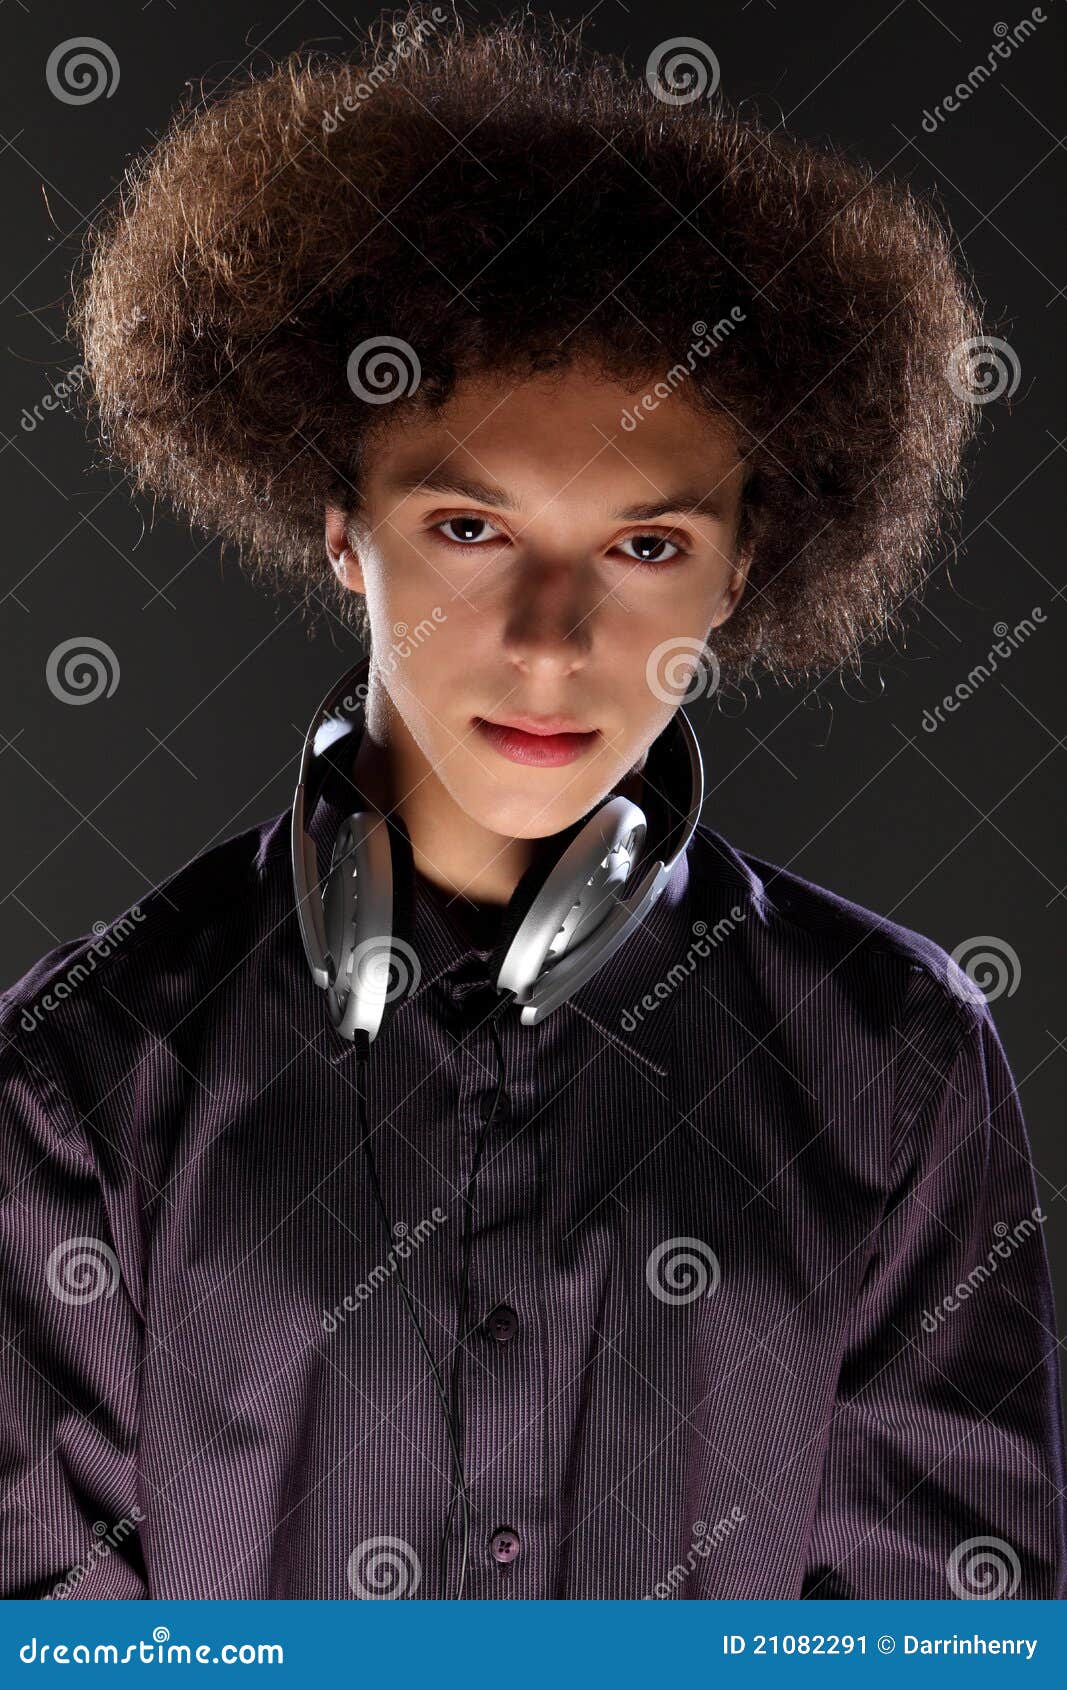 Young Teenager Man Music DJ with Afro Hairstyle Stock Image - Image of  portrait, background: 21082291